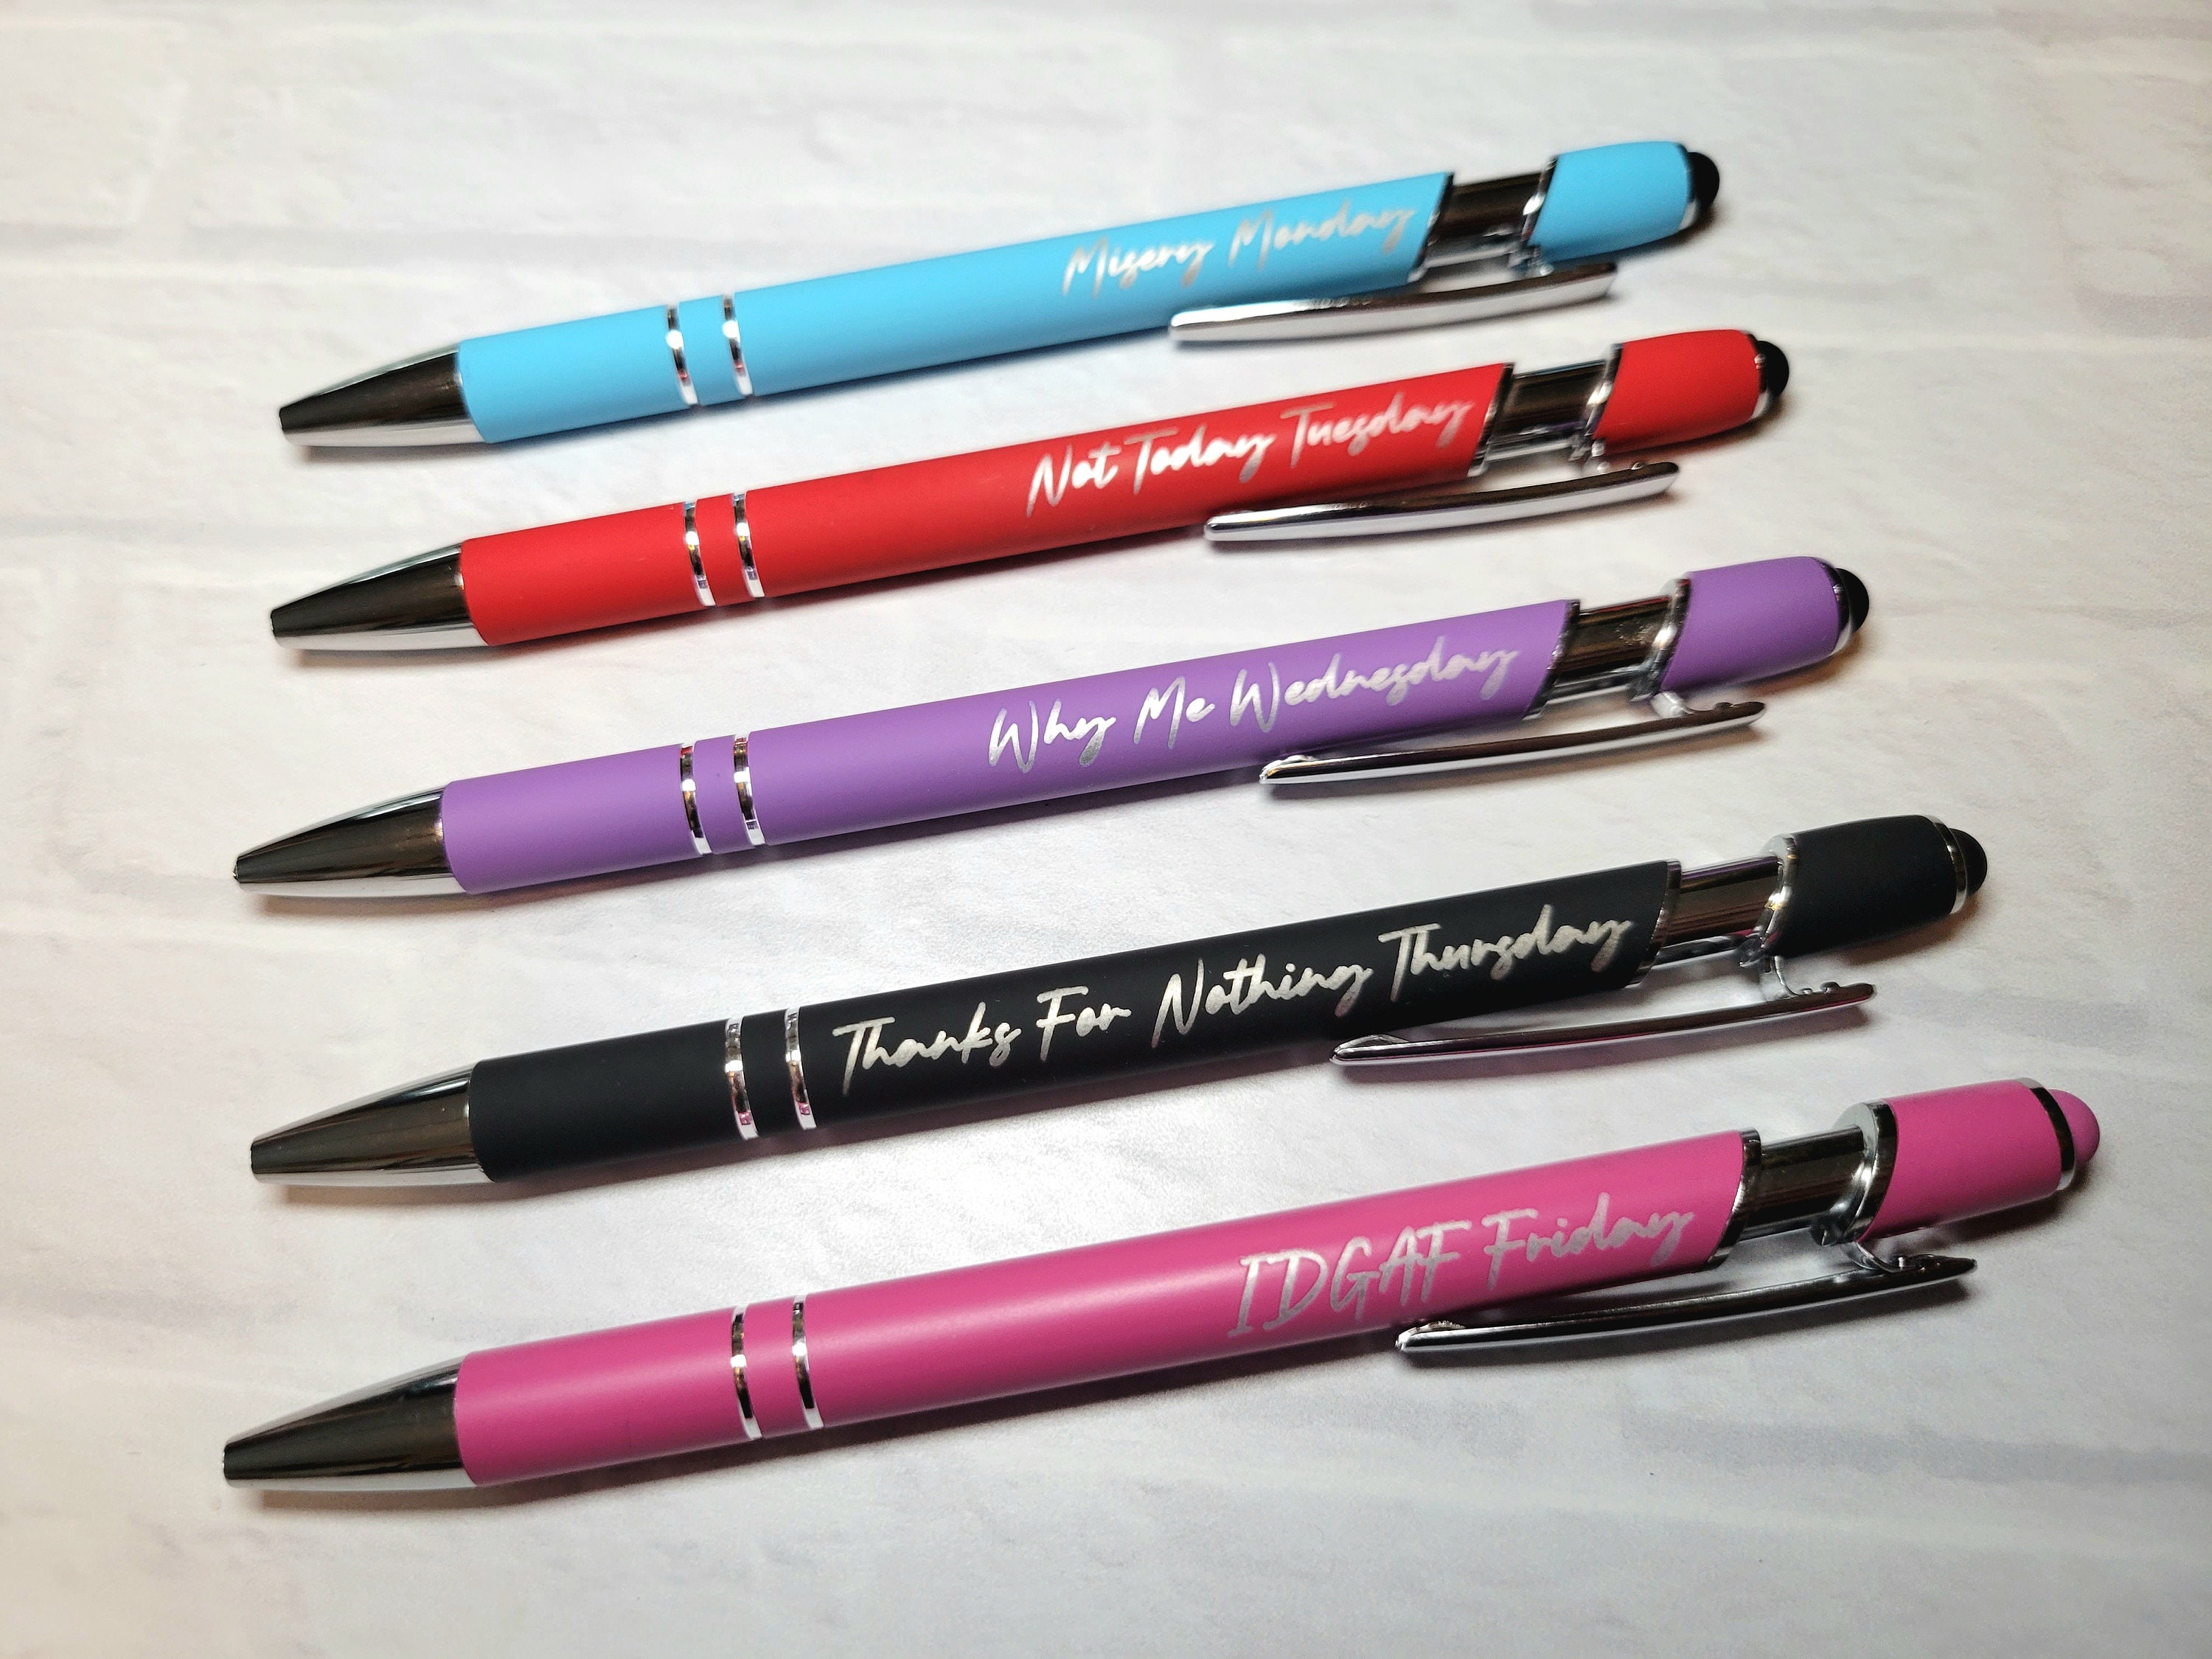 Rude Pens For Adults Silly Ballpoint Novelty Funky Stationery Gifts Office  PACK1